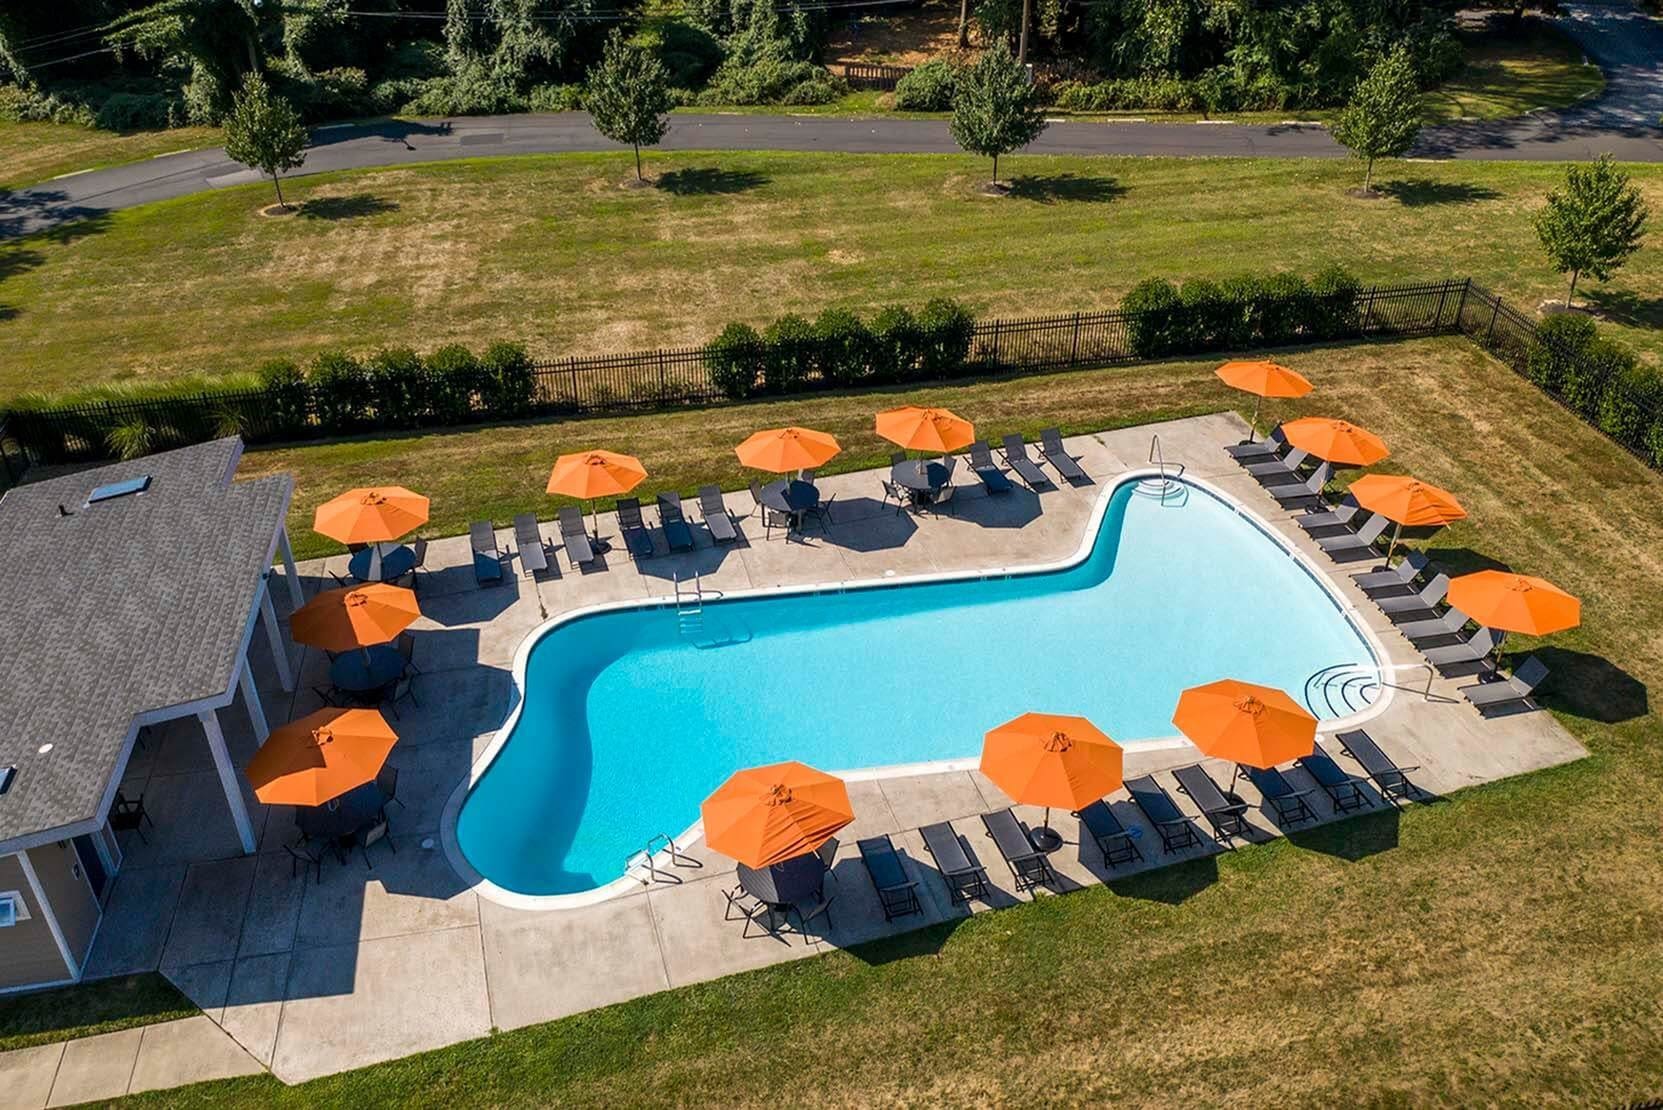 Sparkling pool with lounge chairs and umbrella at The Wellington, Hatboro, Pennsylvania